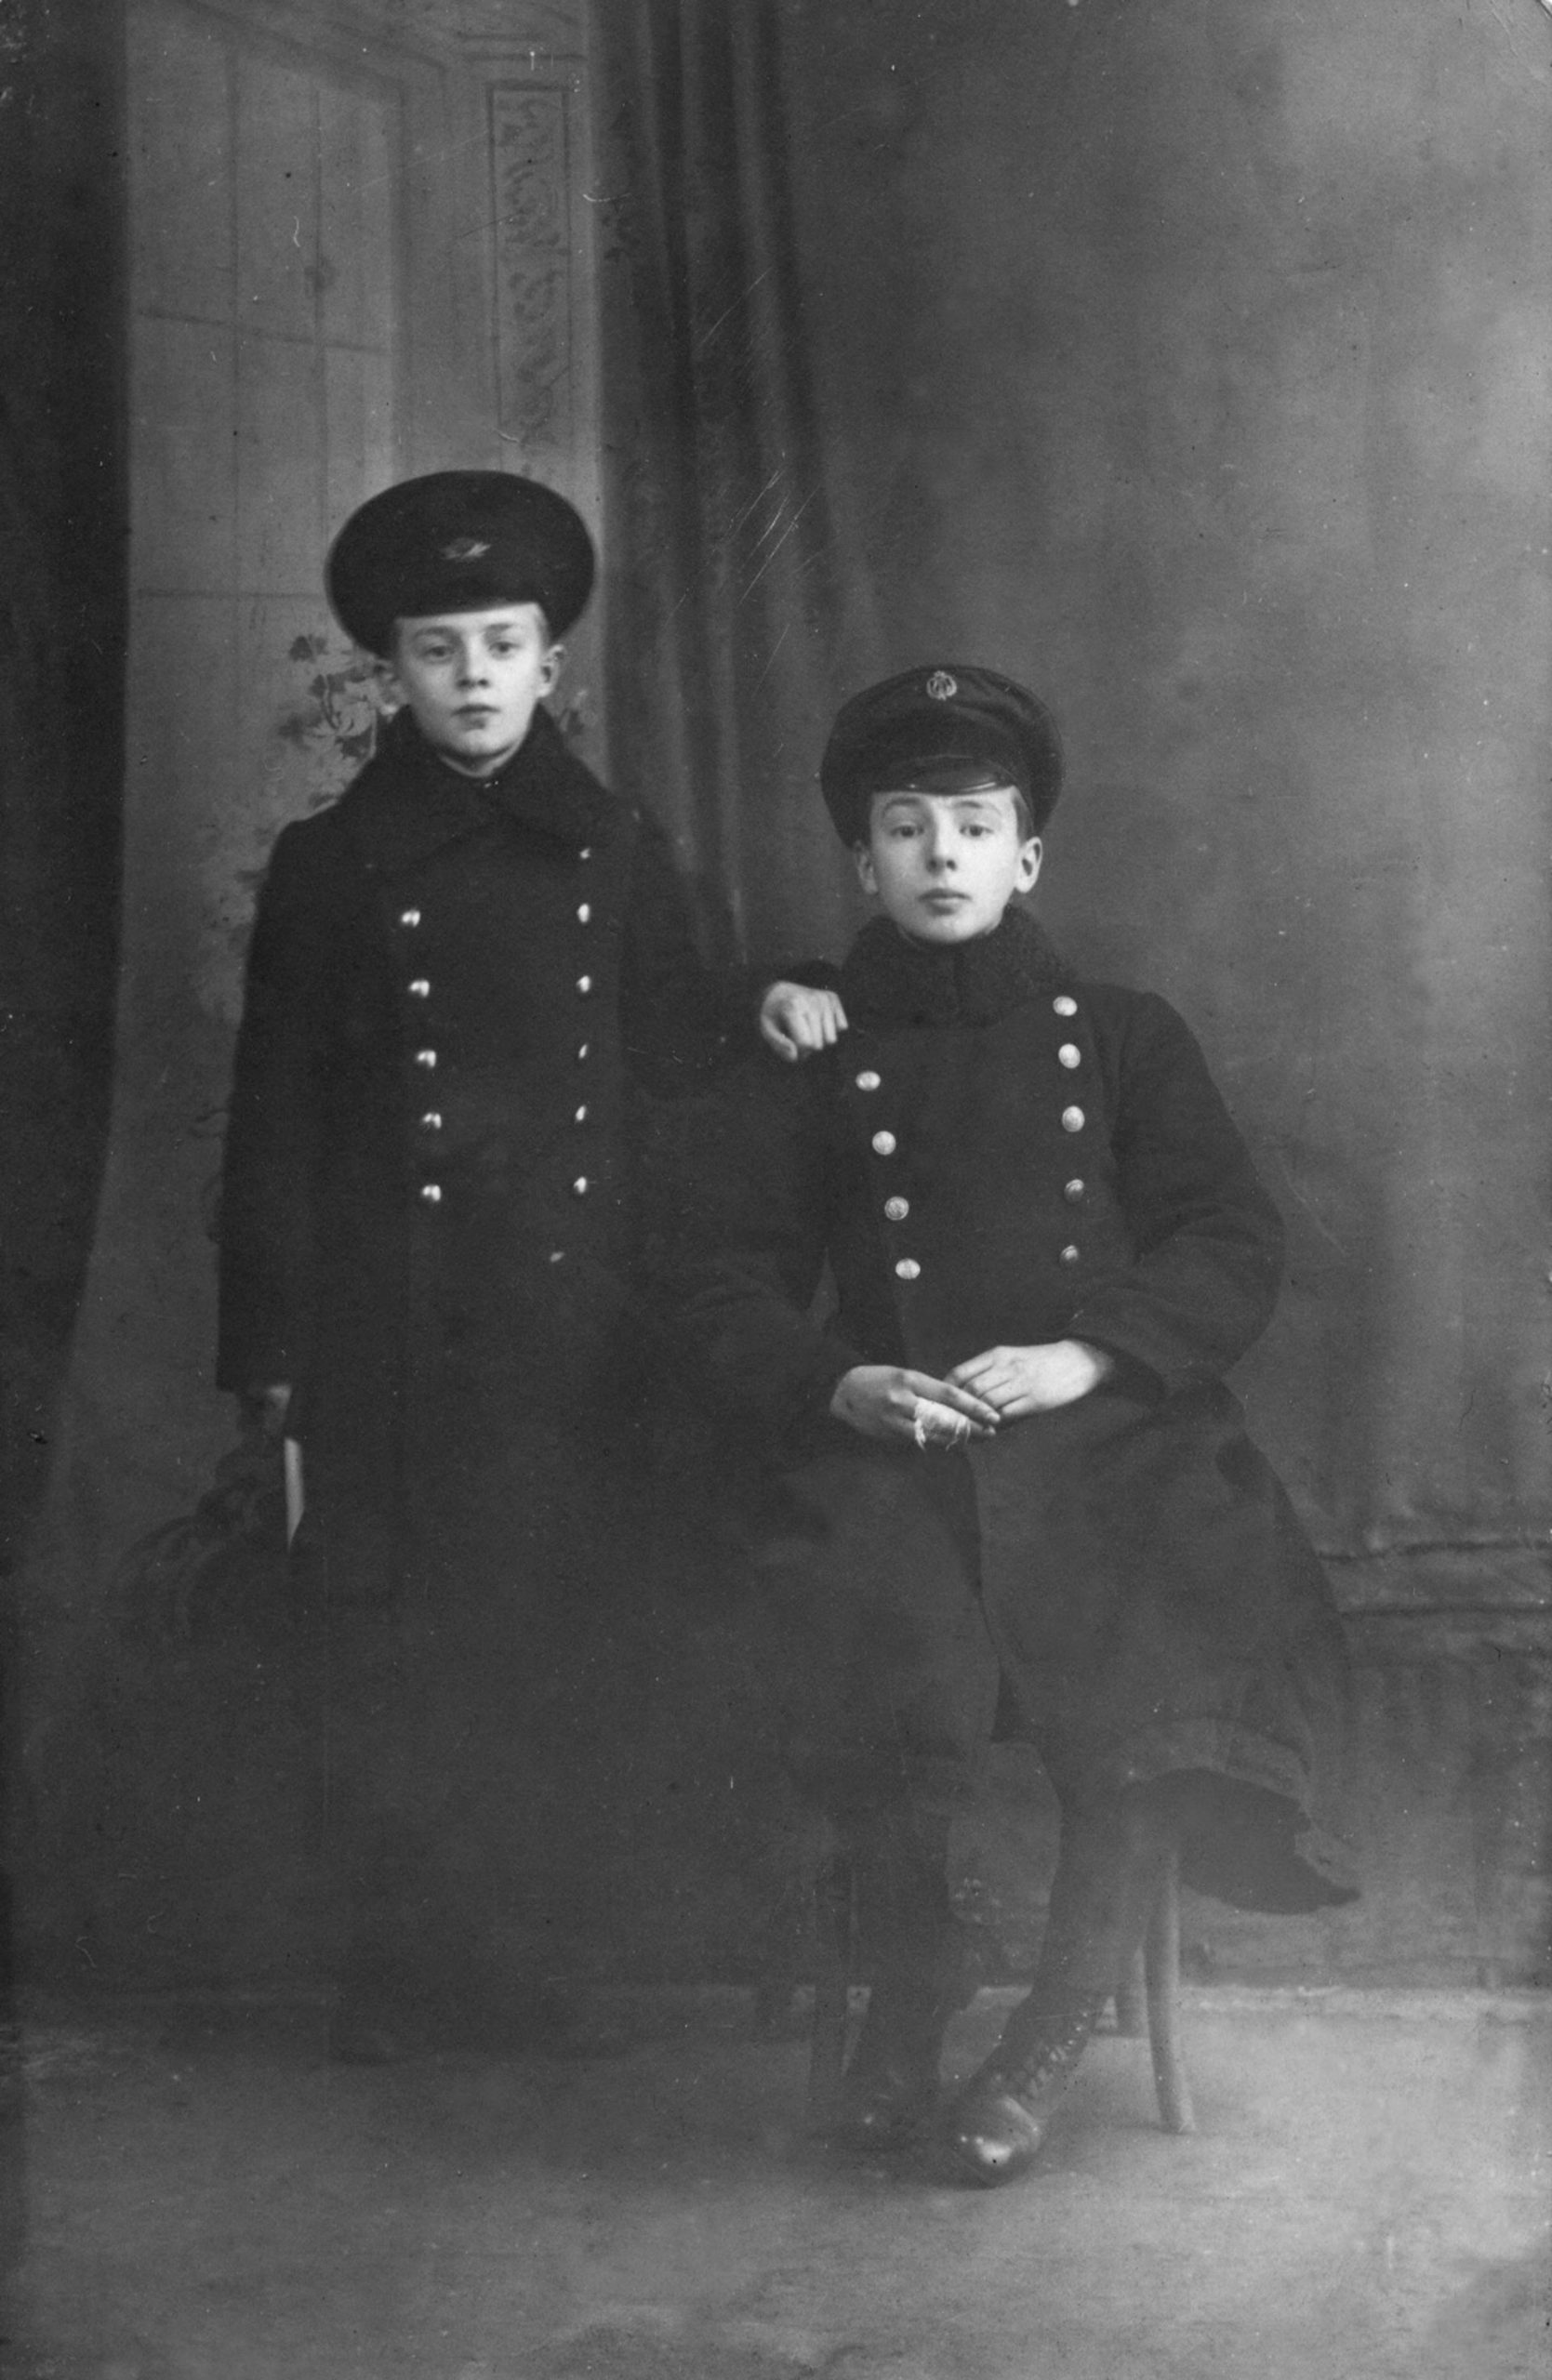 A young George Balanchine with his brother Andrea in military outfits, 1900s